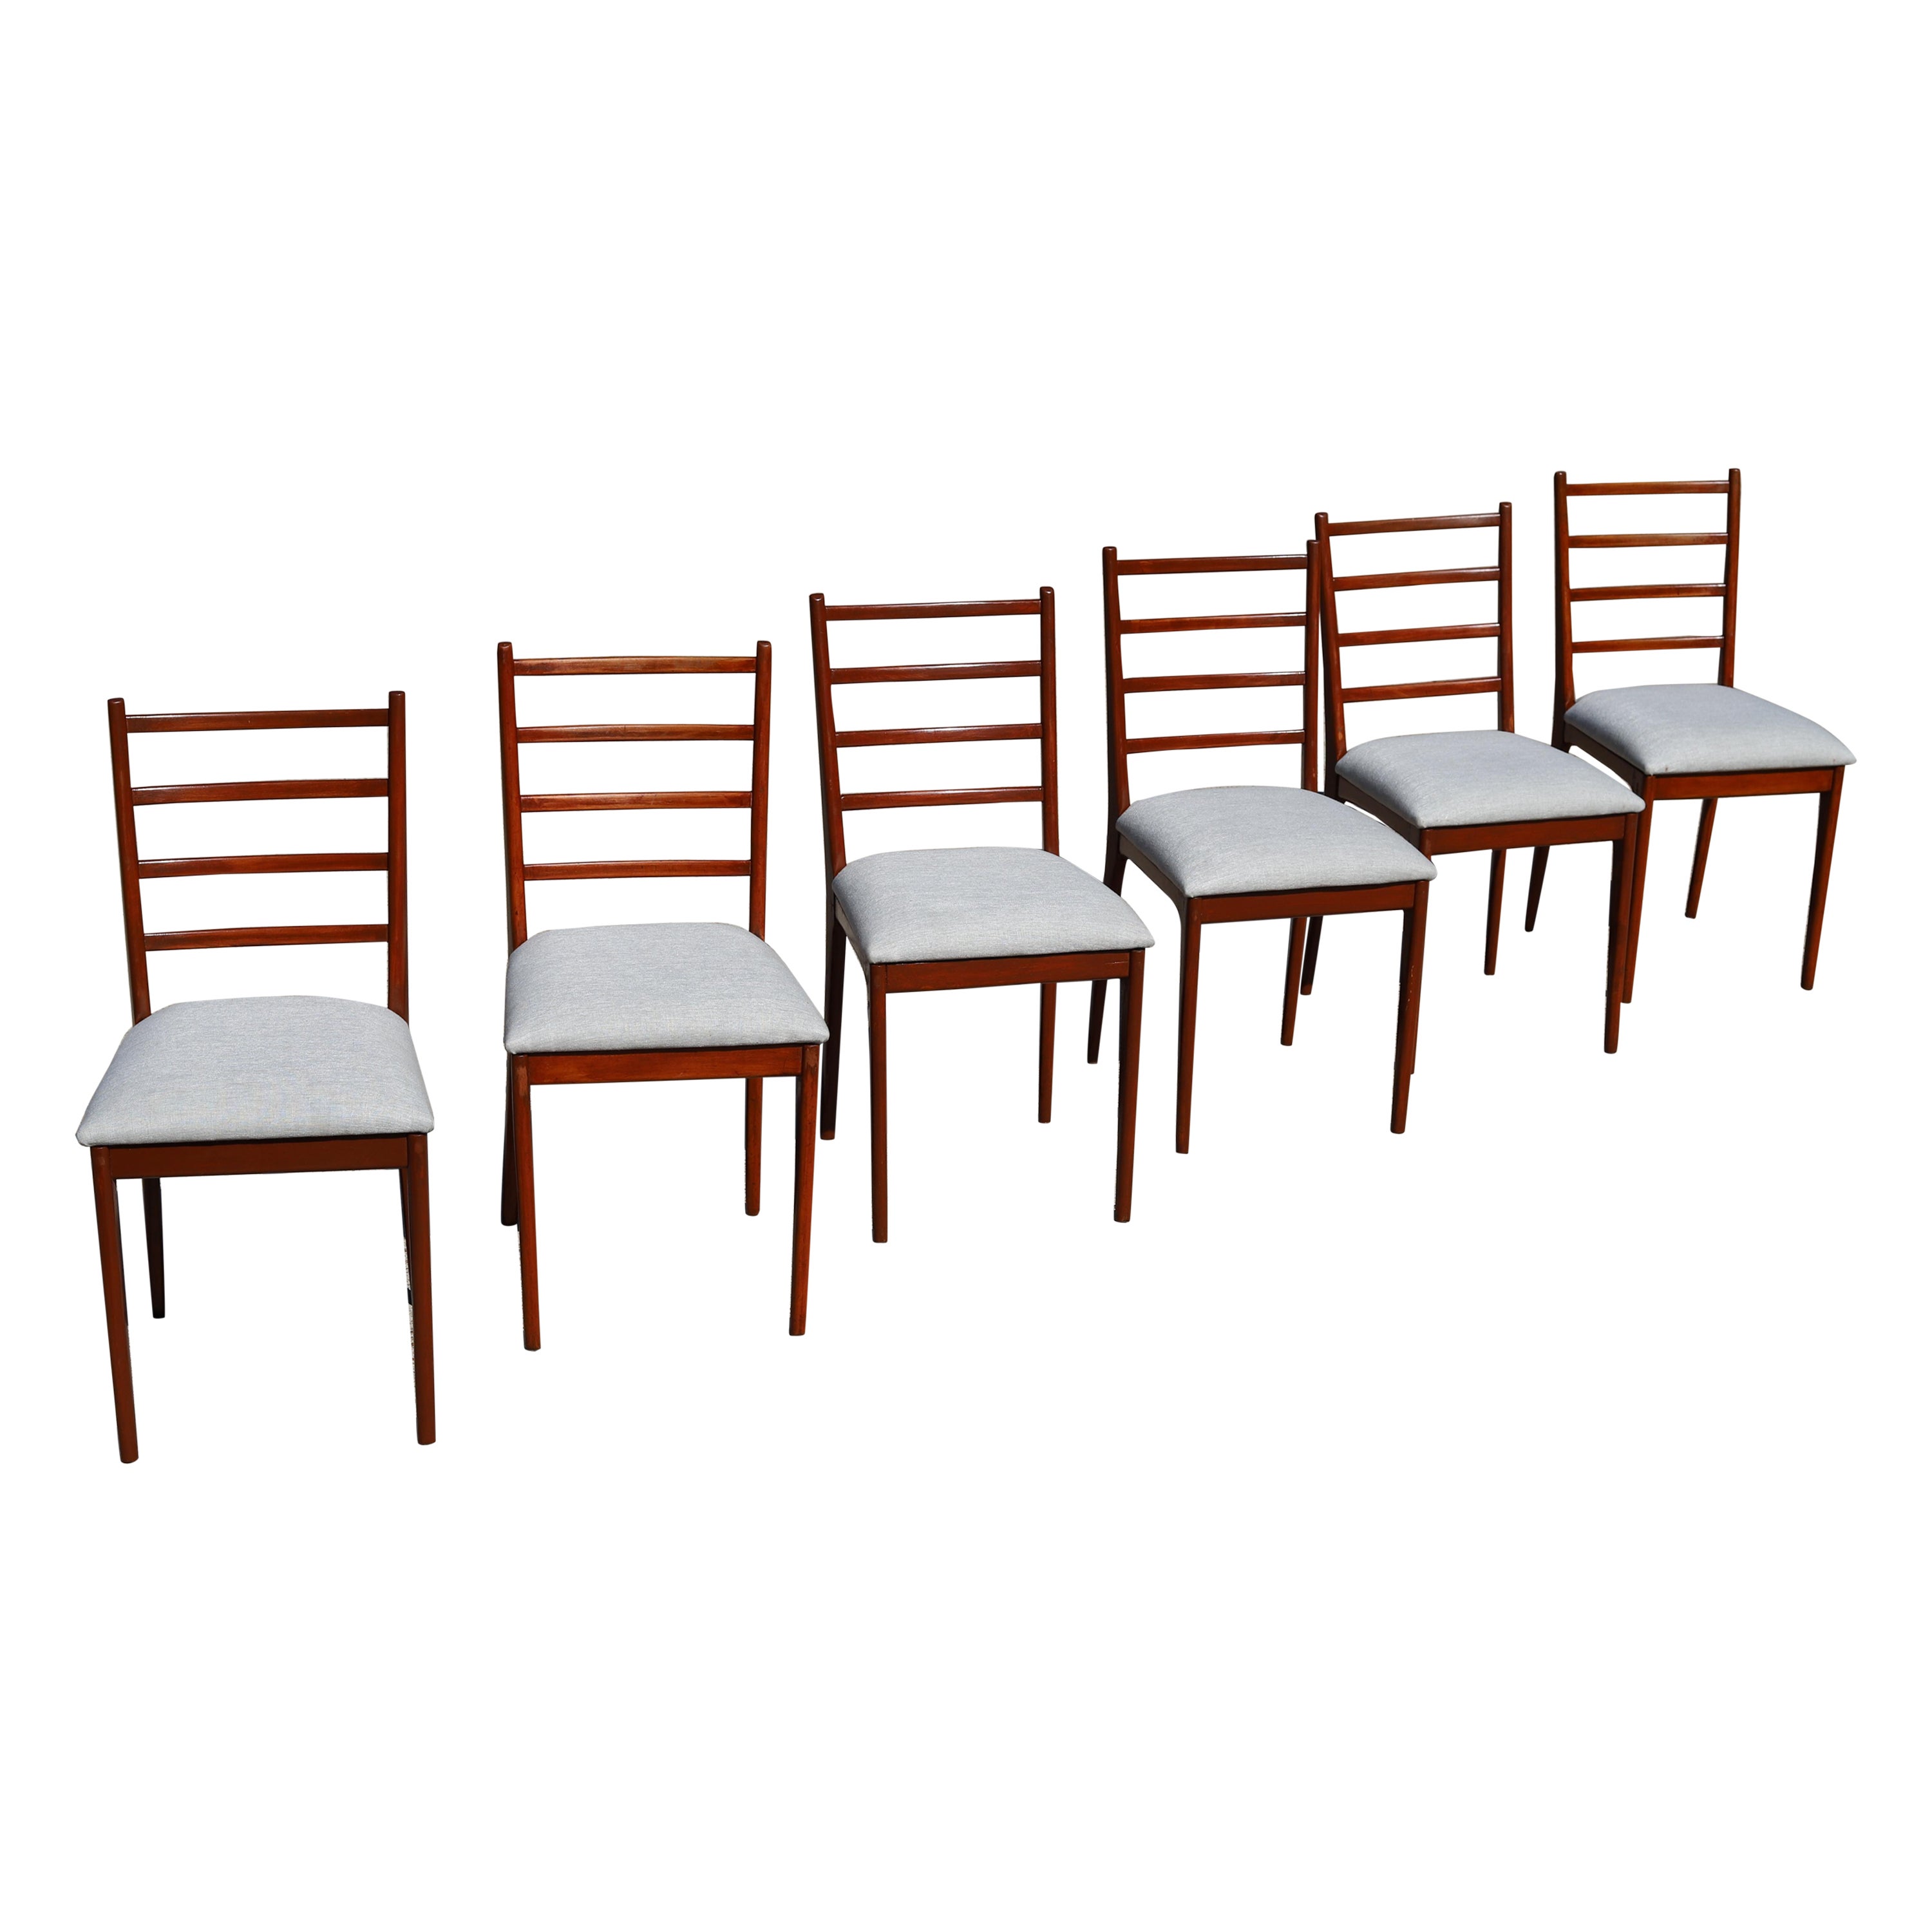 Set of Six Dining Chairs in Peroba Do Campo Hardwood, Giuseppe Scapinelli